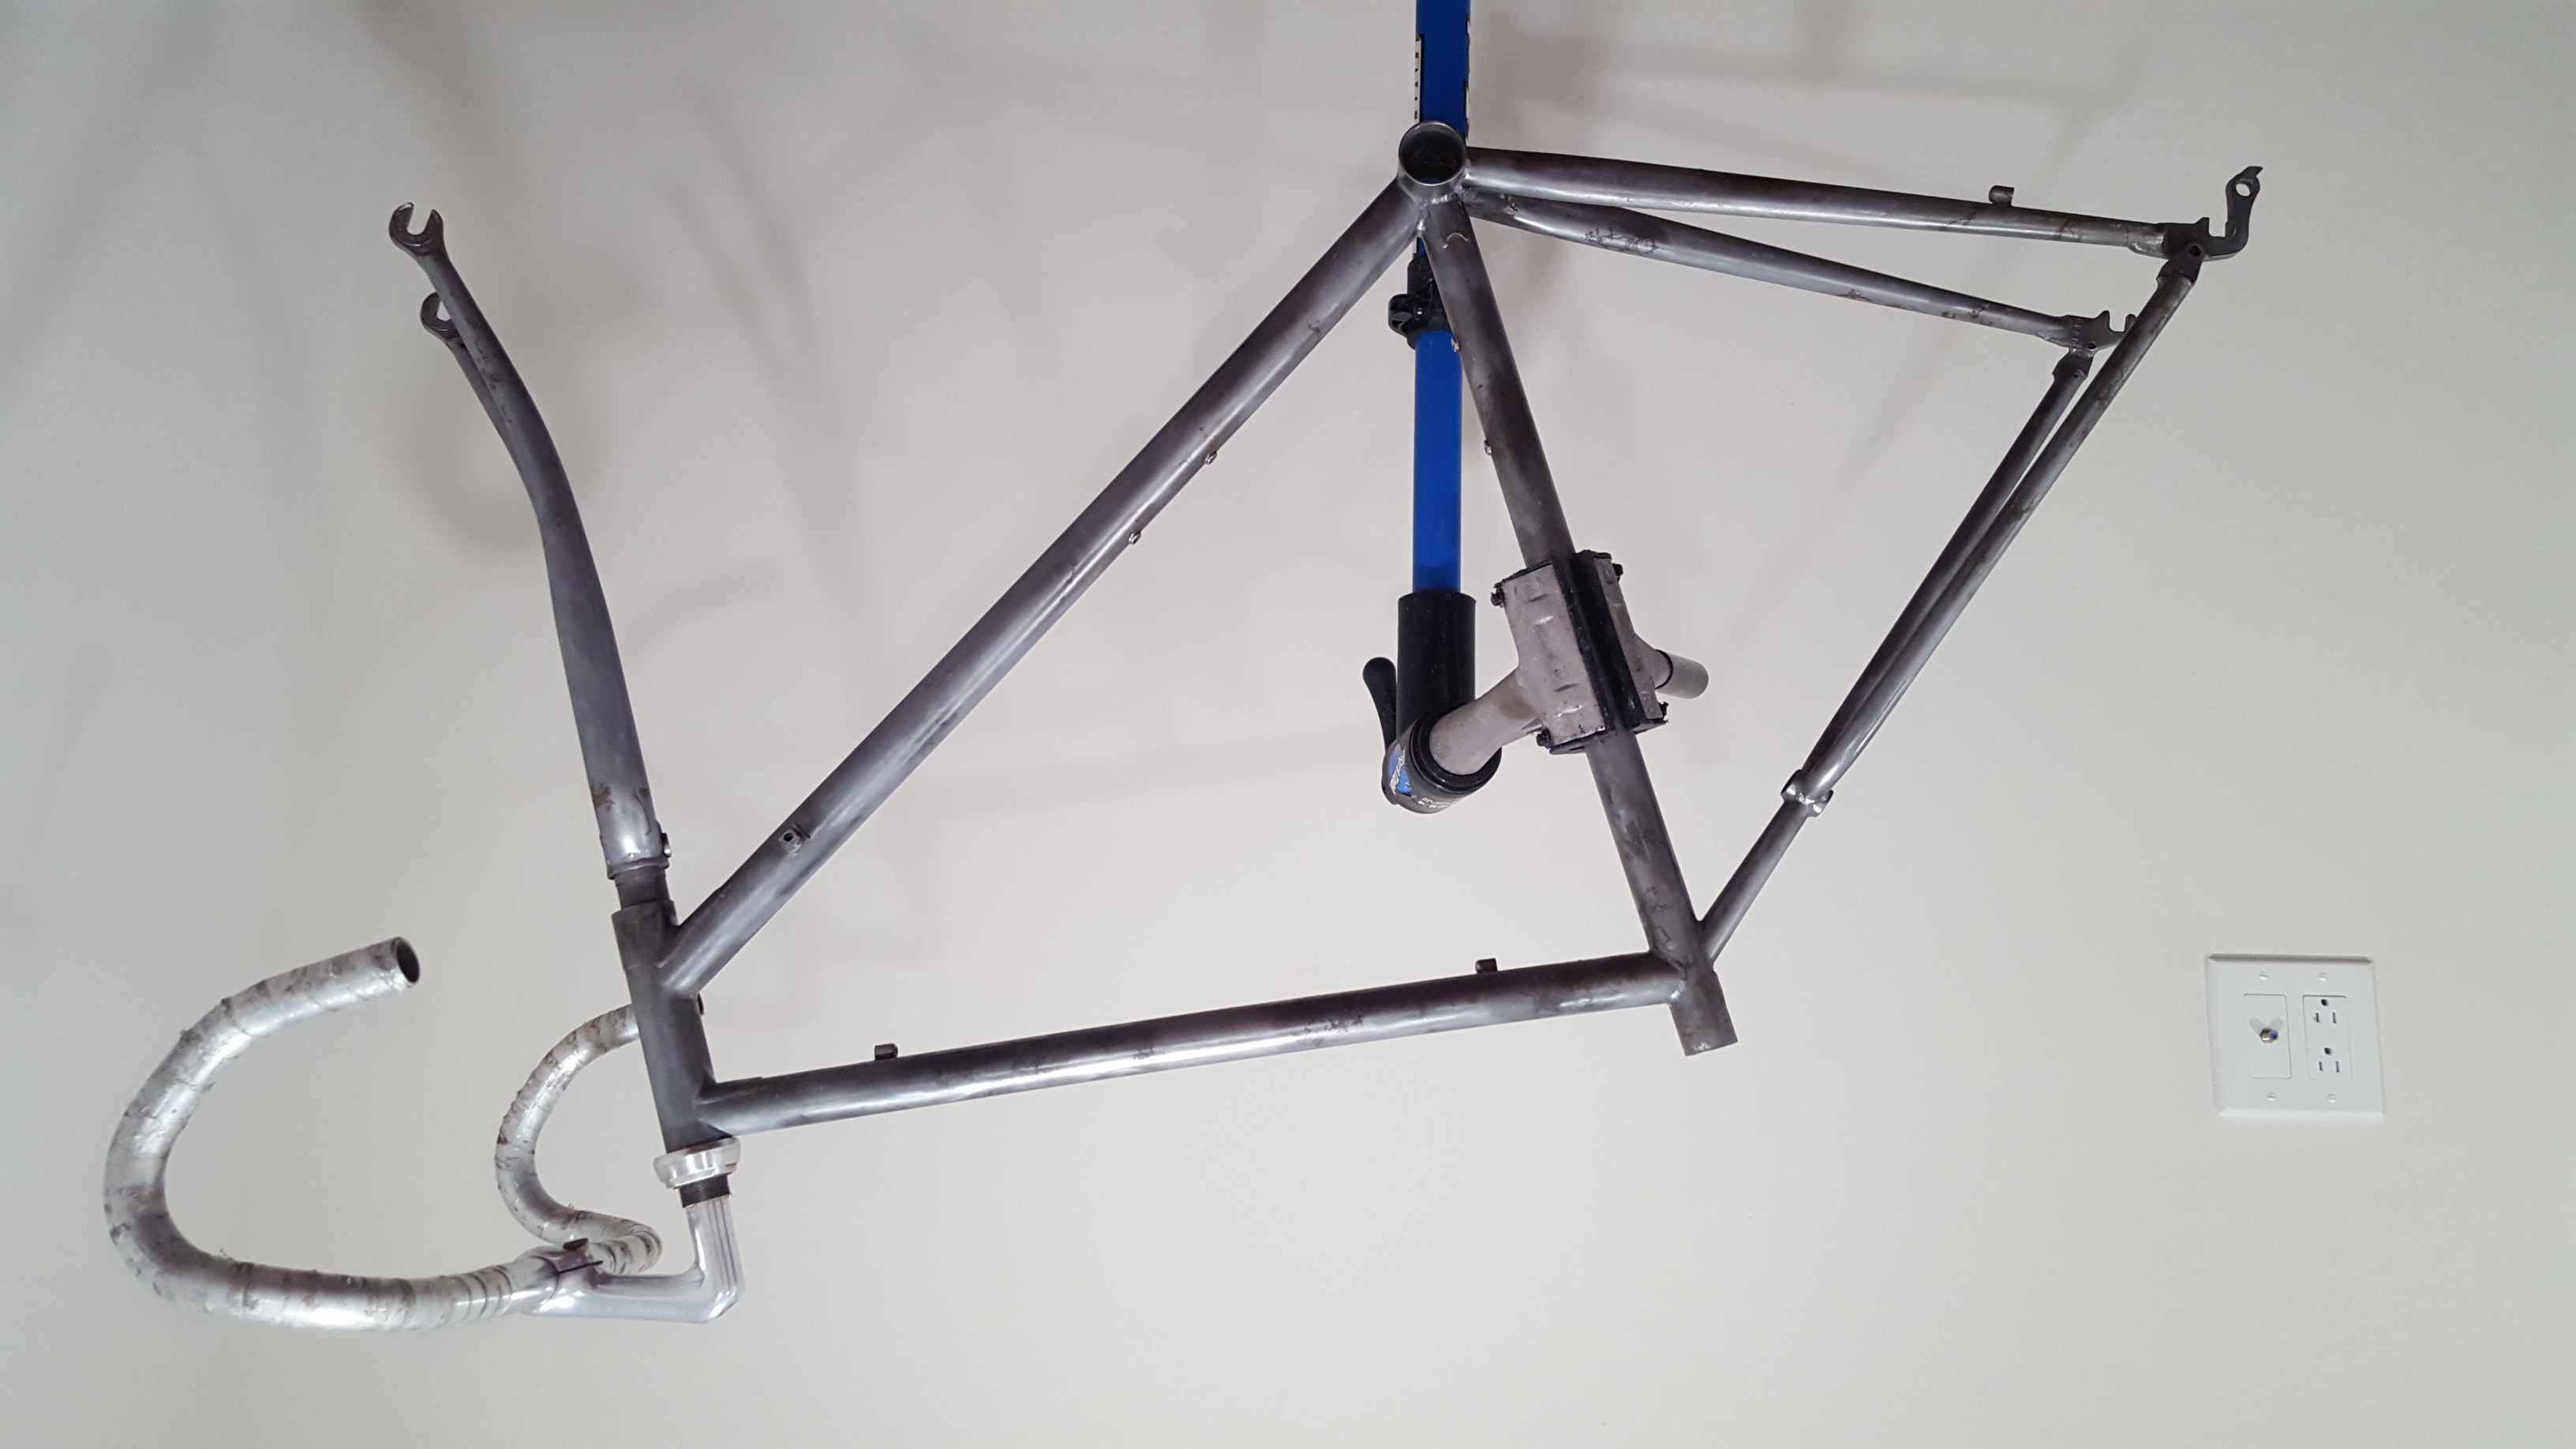 A bicycle frame, stripped of its paint, is in a blue bike stand, clamped by the seat-tube. The fork is inserted, with a stem and drop-handlebars. The background is a white wall.